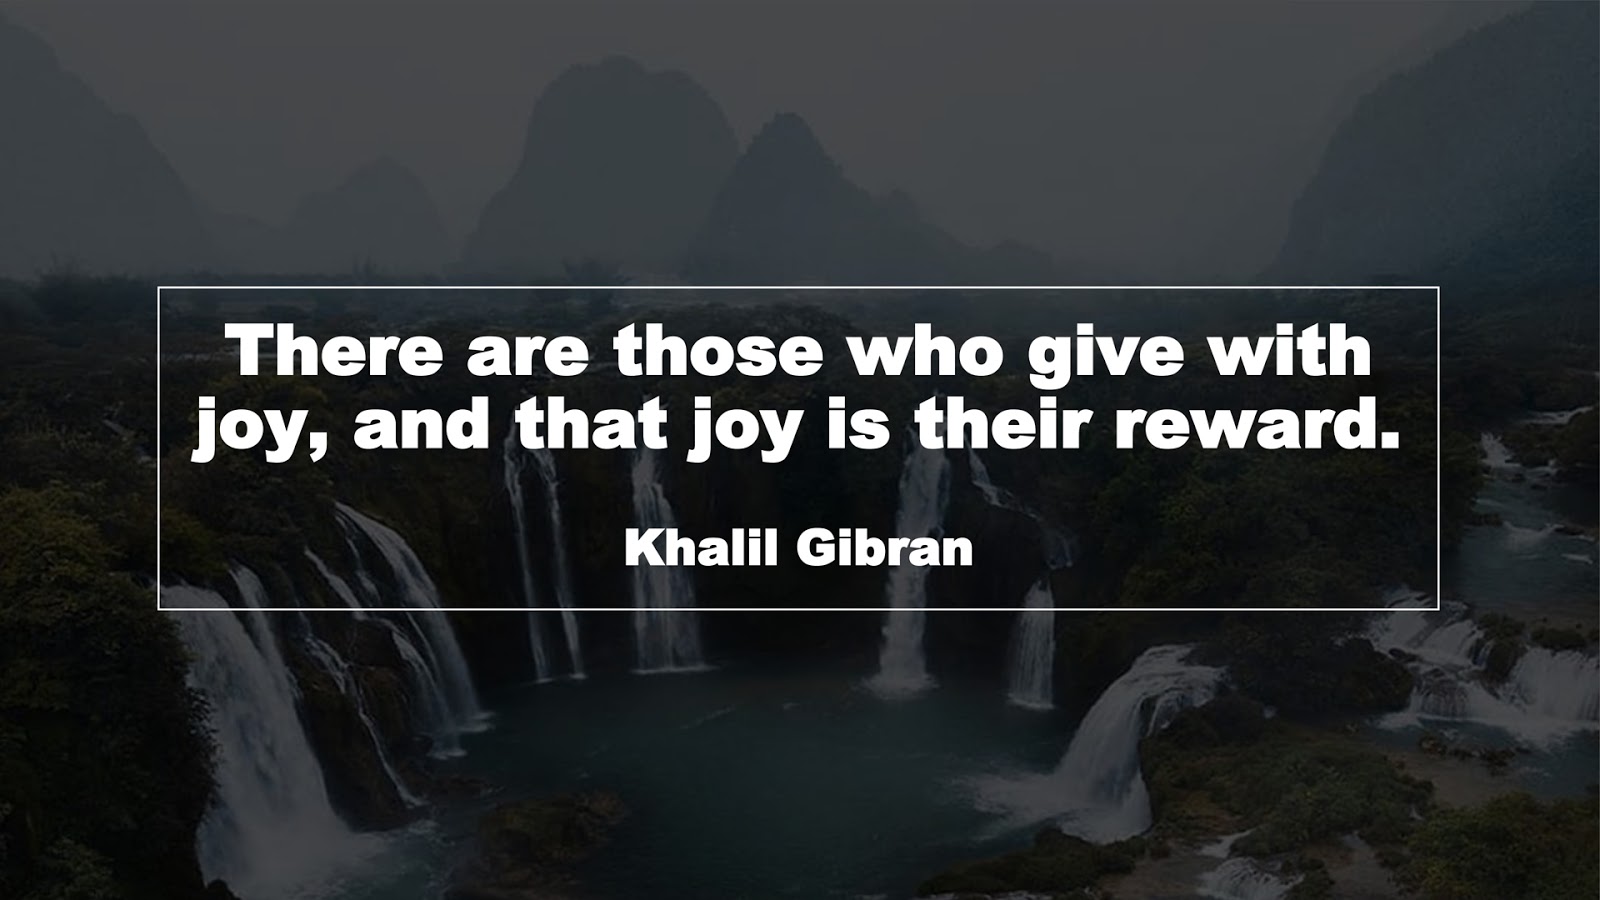 There are those who give with joy, and that joy is their reward. (Khalil Gibran)